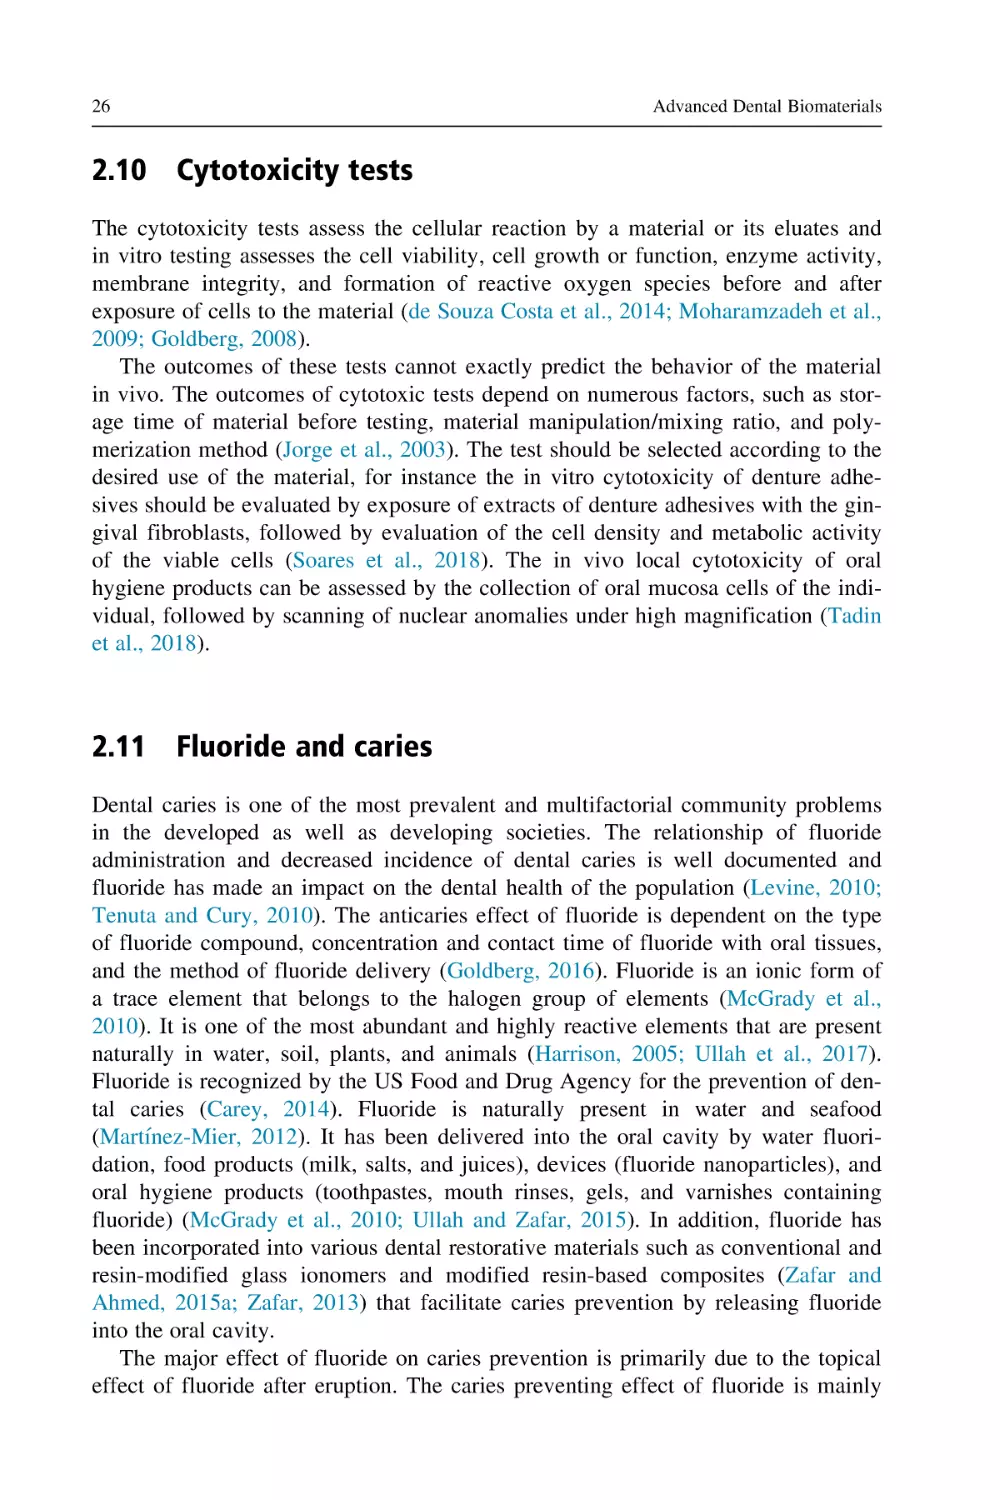 2.10 Cytotoxicity tests
2.11 Fluoride and caries